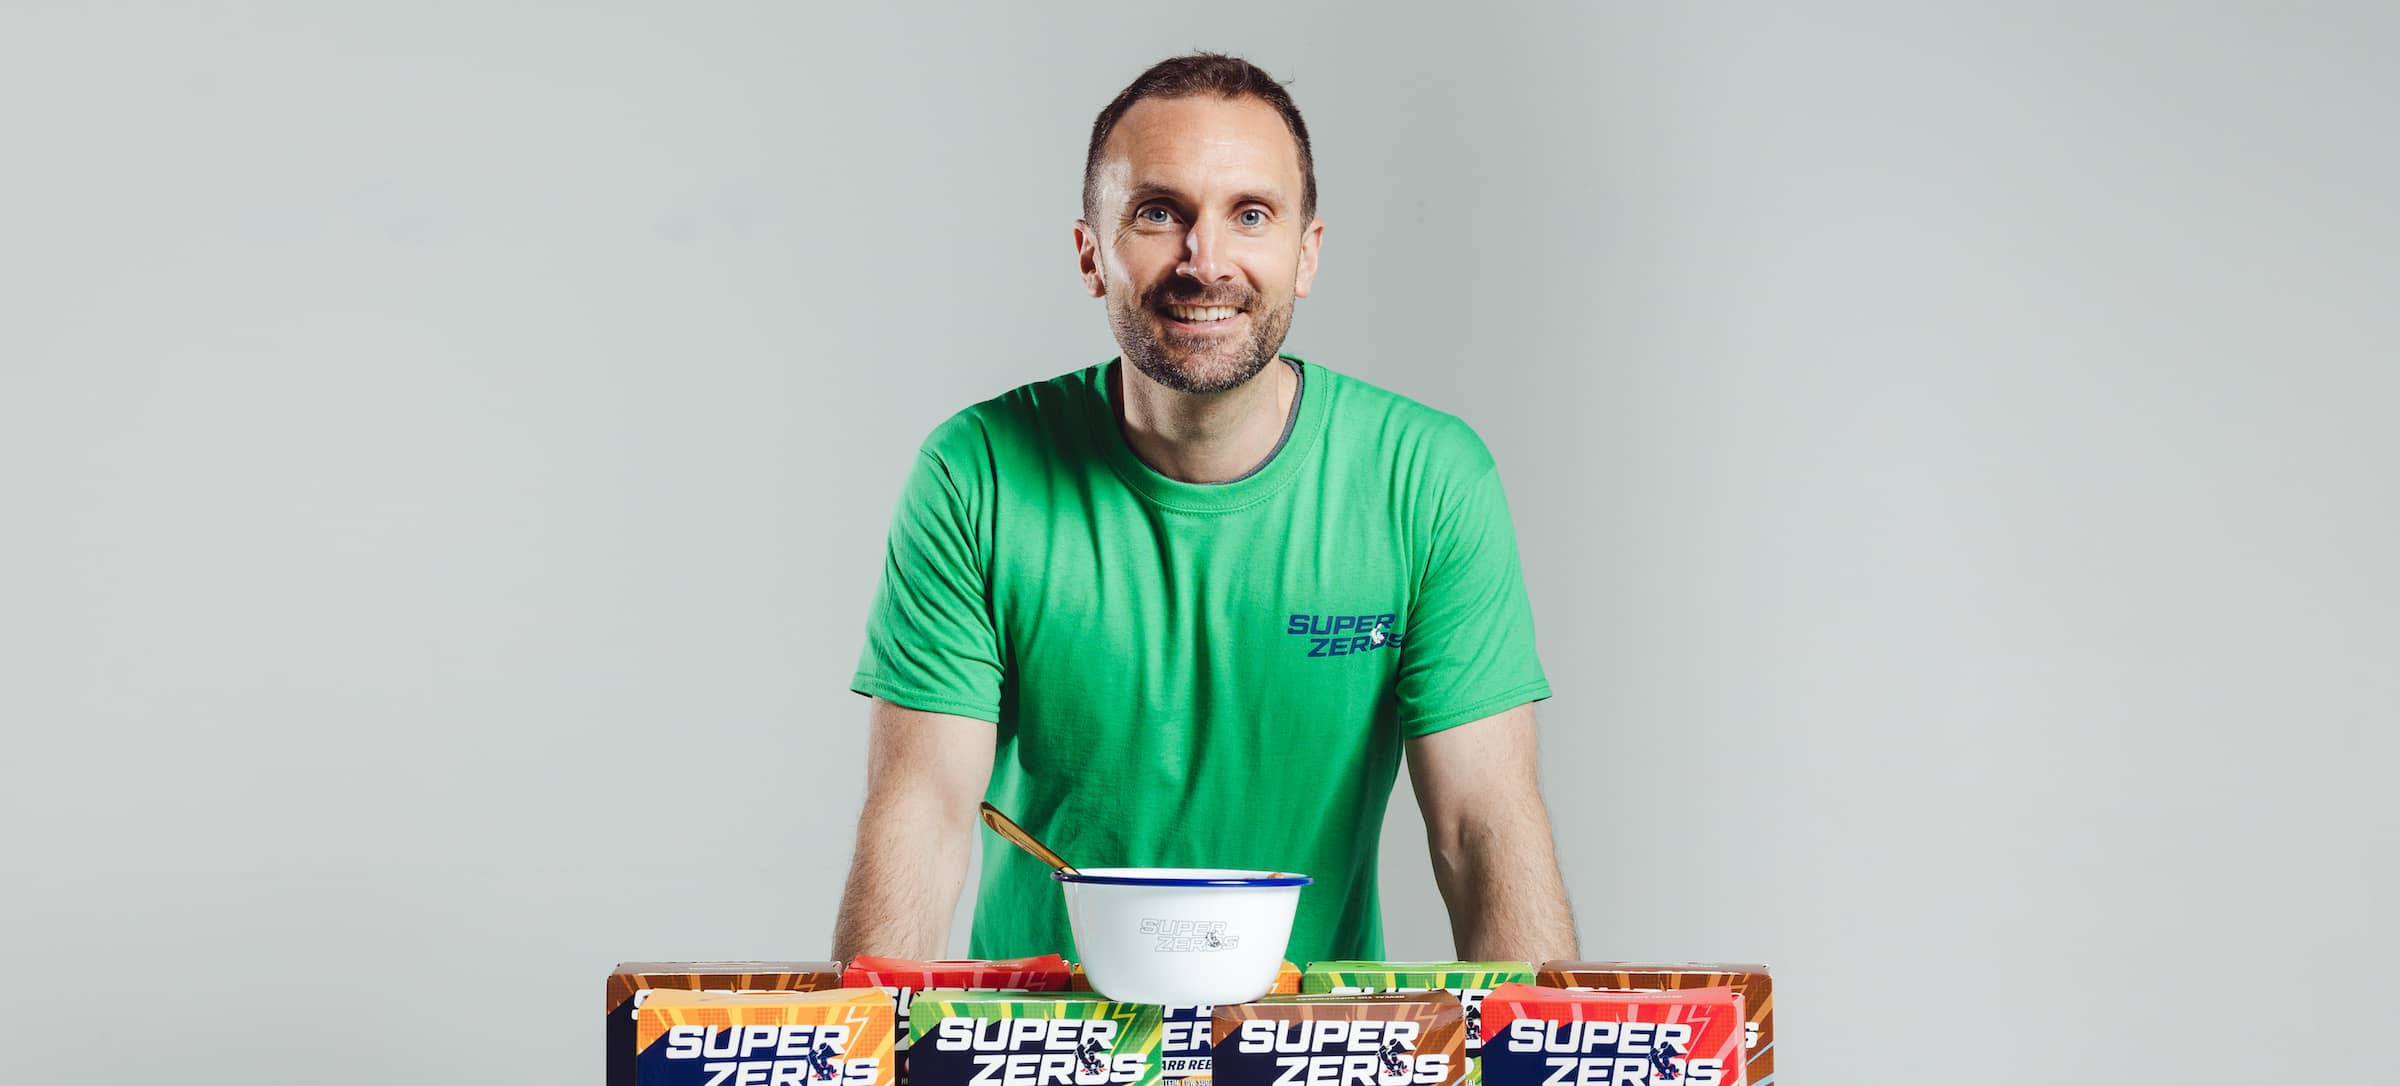 Industry Insider Interview With Founder Noel Eves Of The Superzeros Cereal Brand